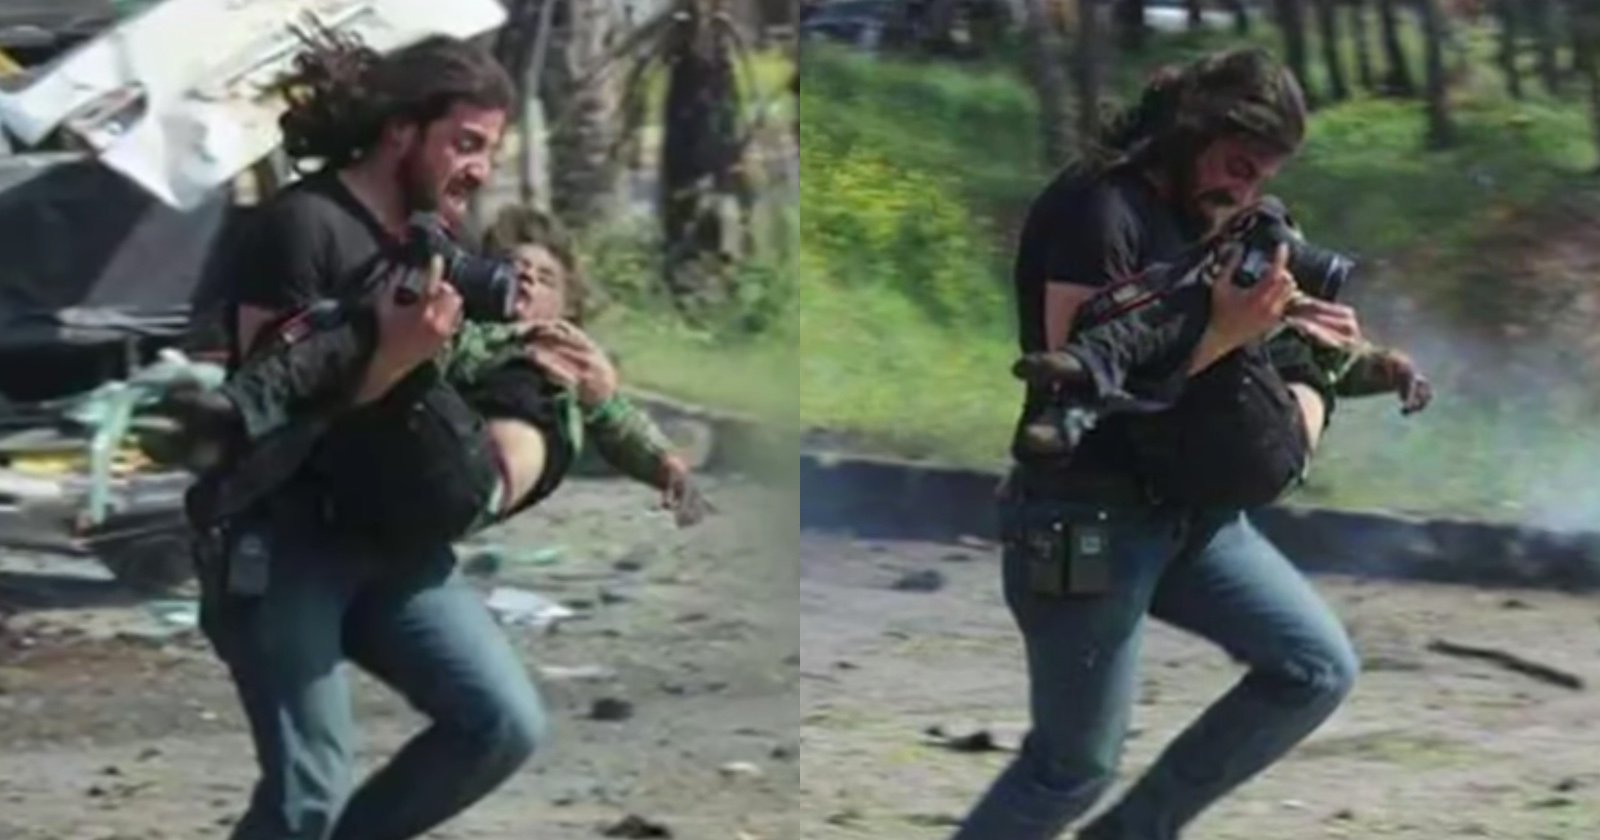  syrian photographer stops shooting rescue injured boy 